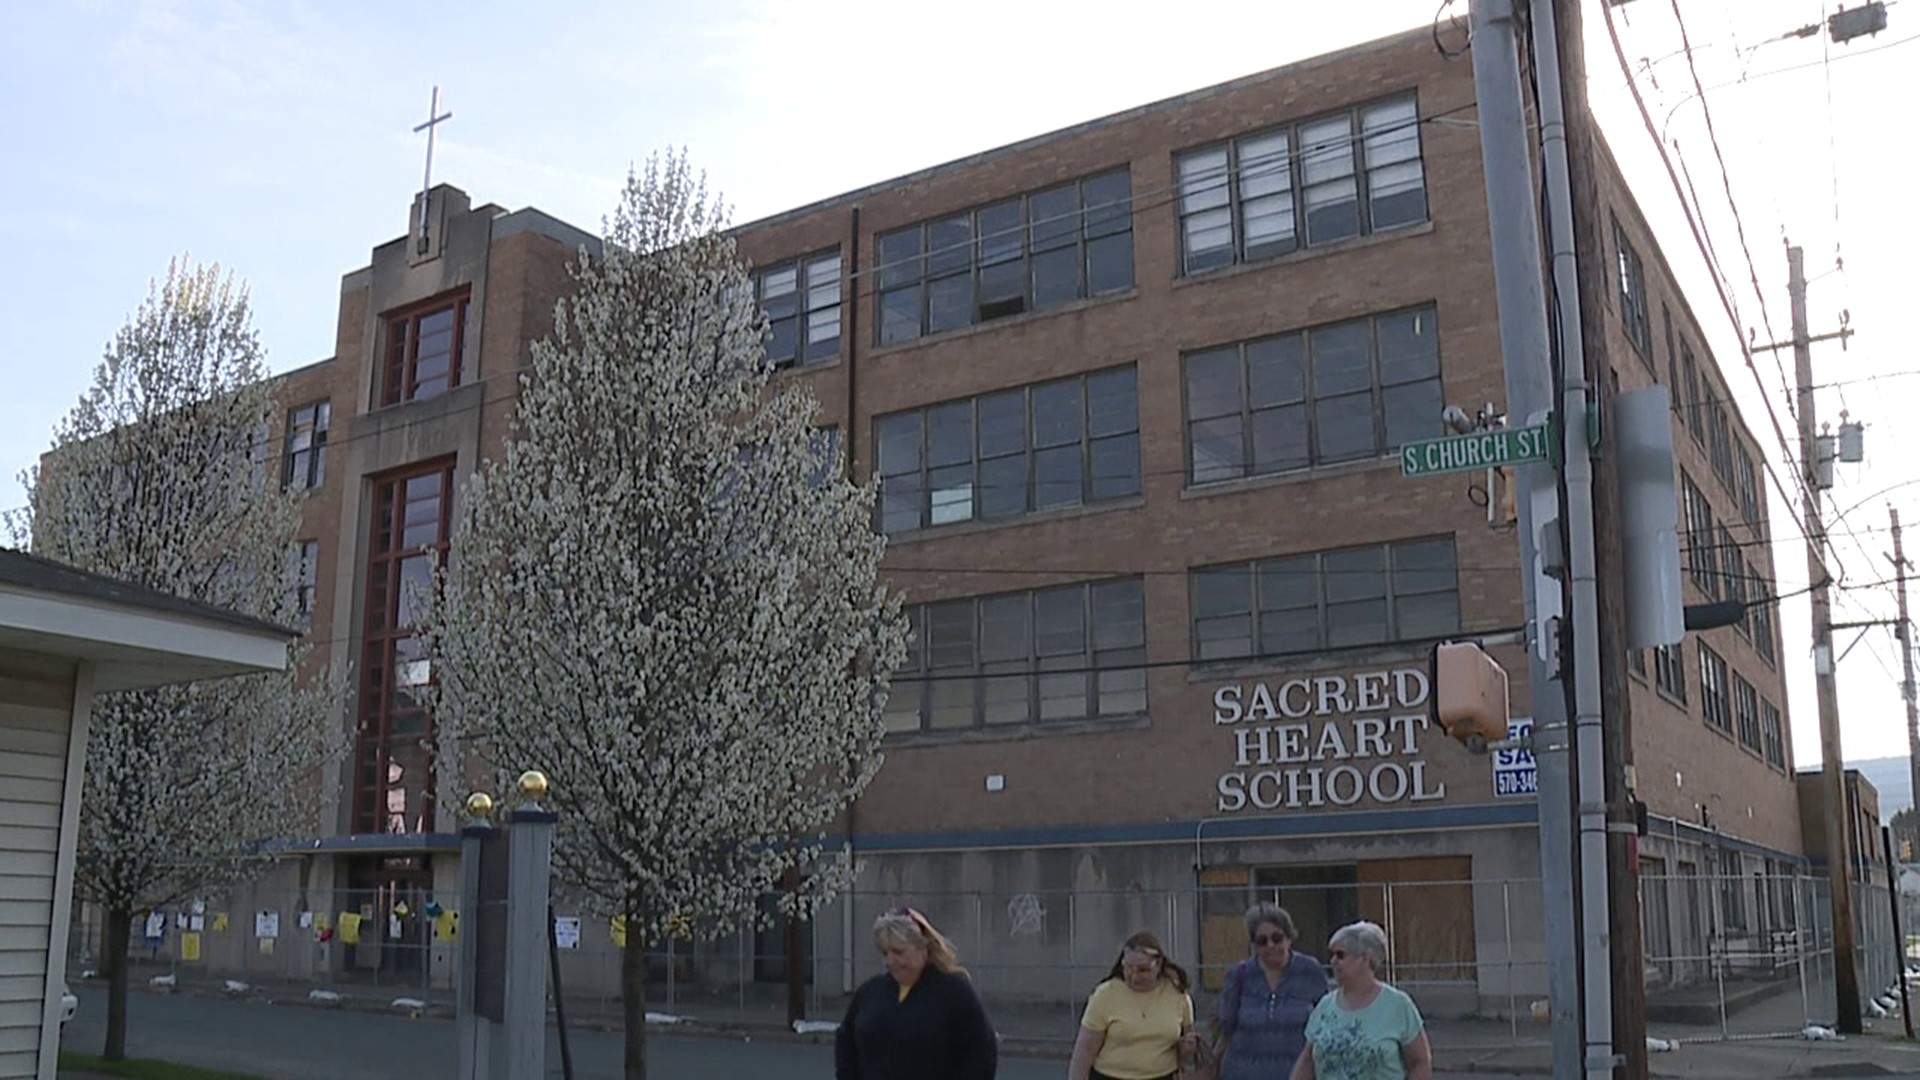 This week the former Sacred Heart High School in Carbondale is set to be torn down and on Sunday alumni gathered at the site to bid it farewell.